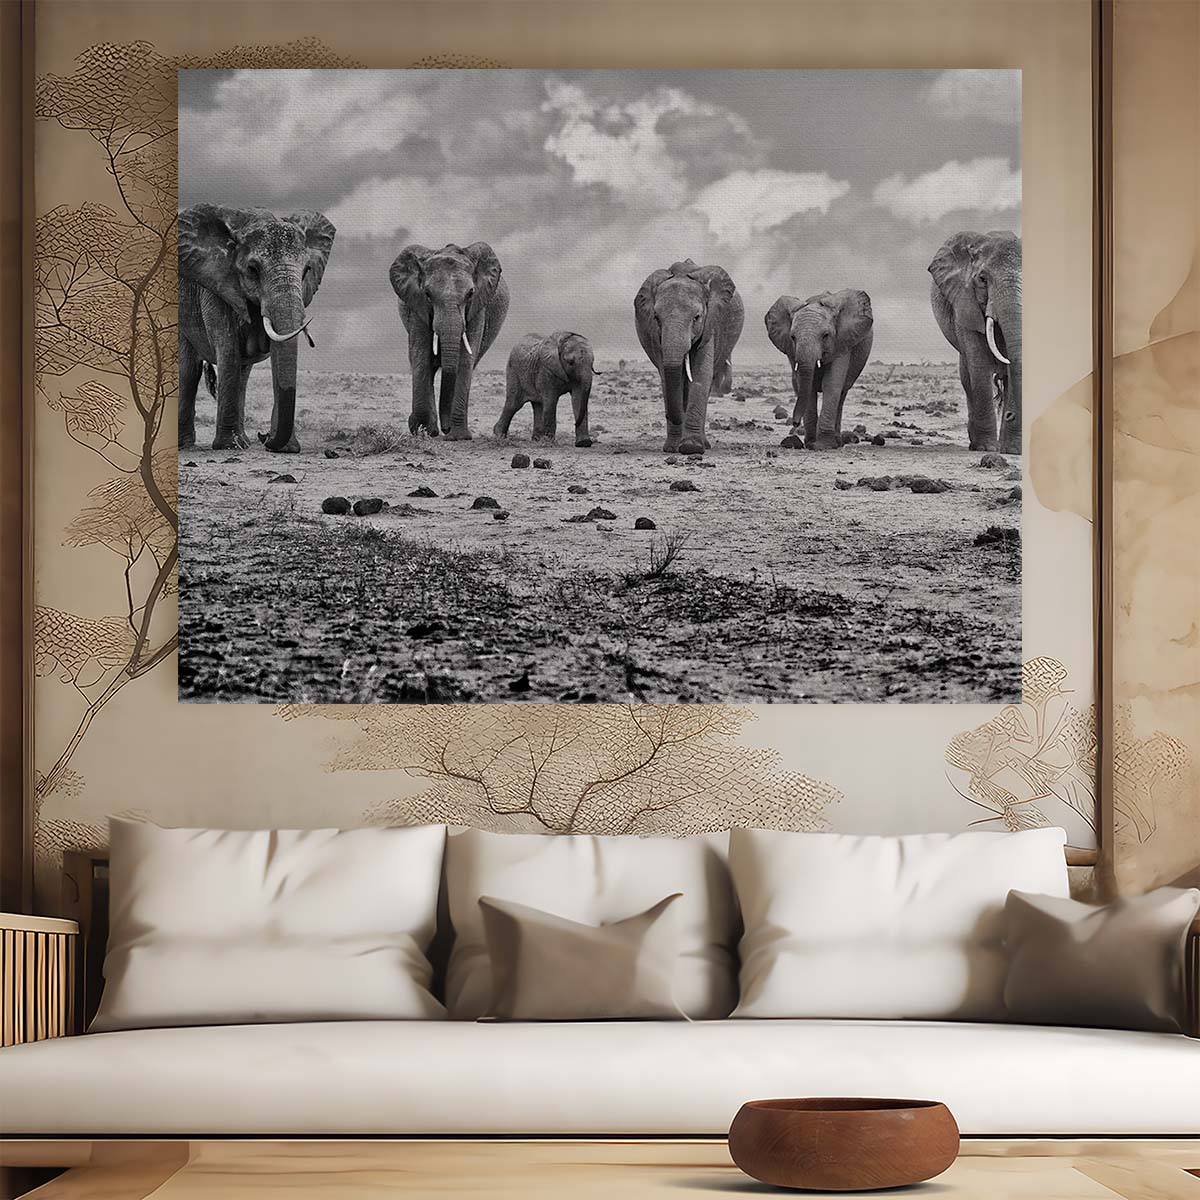 Majestic Elephant Family Safari Monochrome Wall Art by Luxuriance Designs. Made in USA.